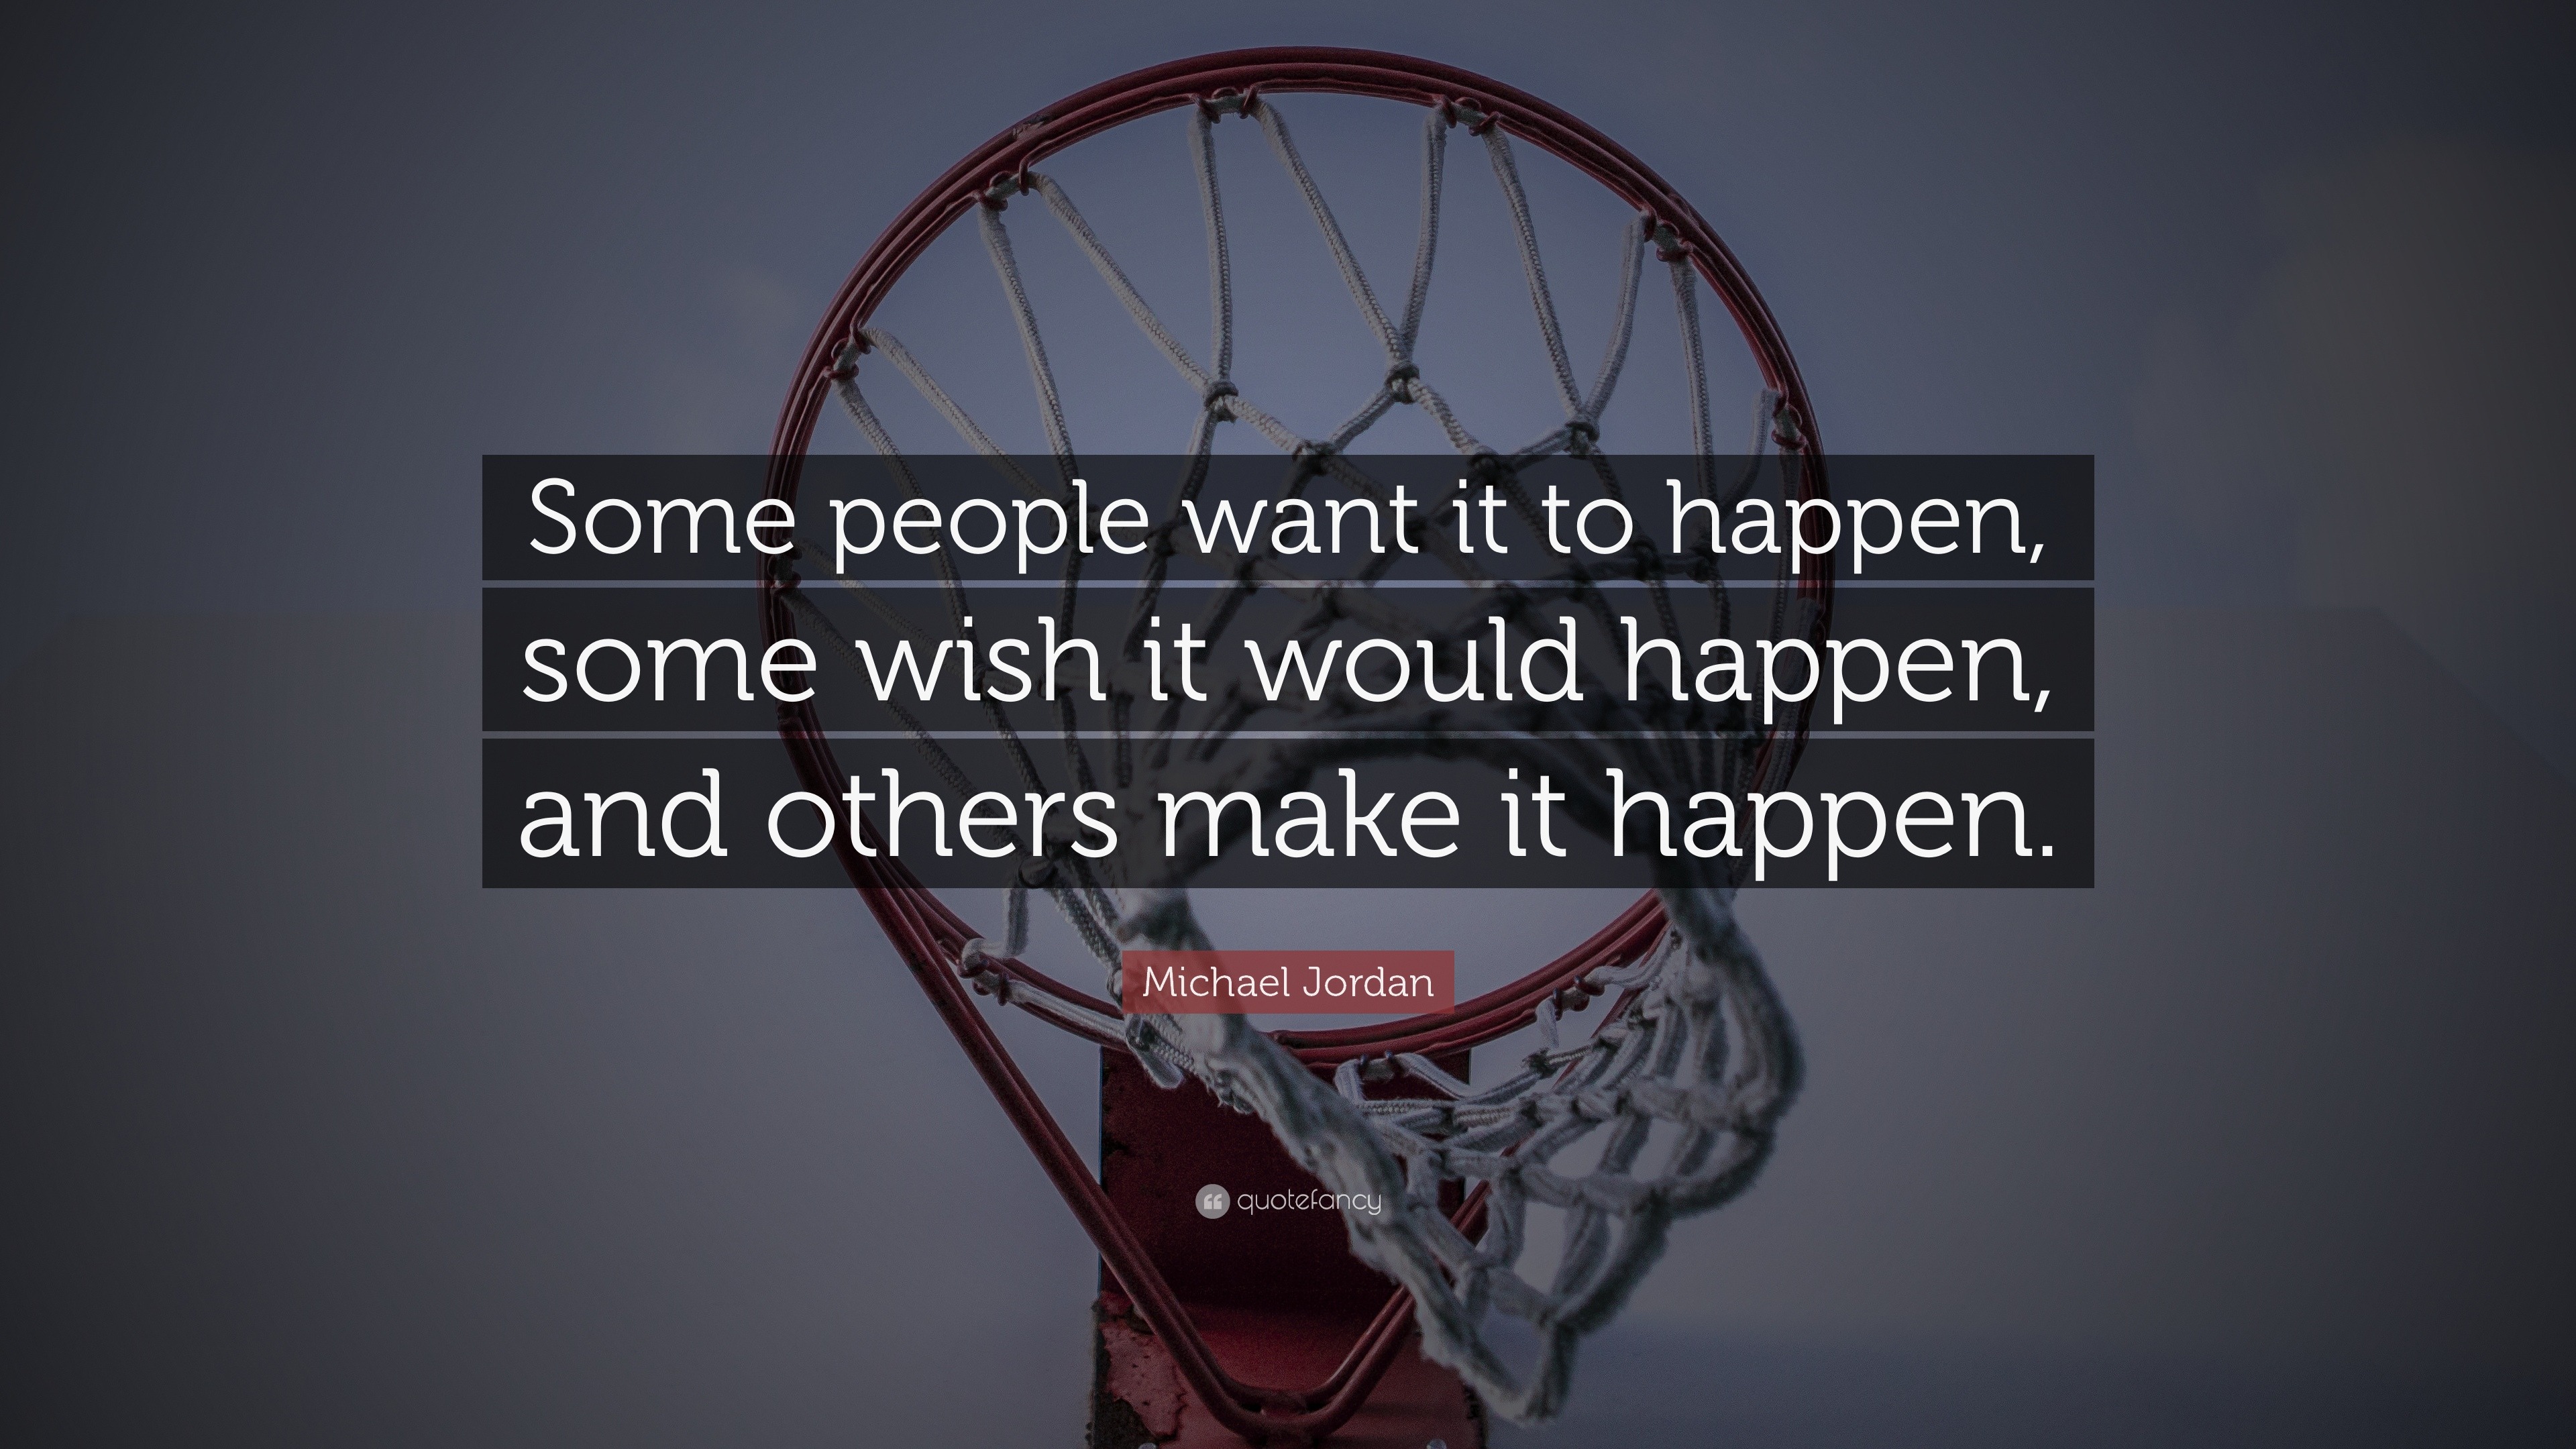 Michael Jordan Quote: “Some people want it to happen, some wish it